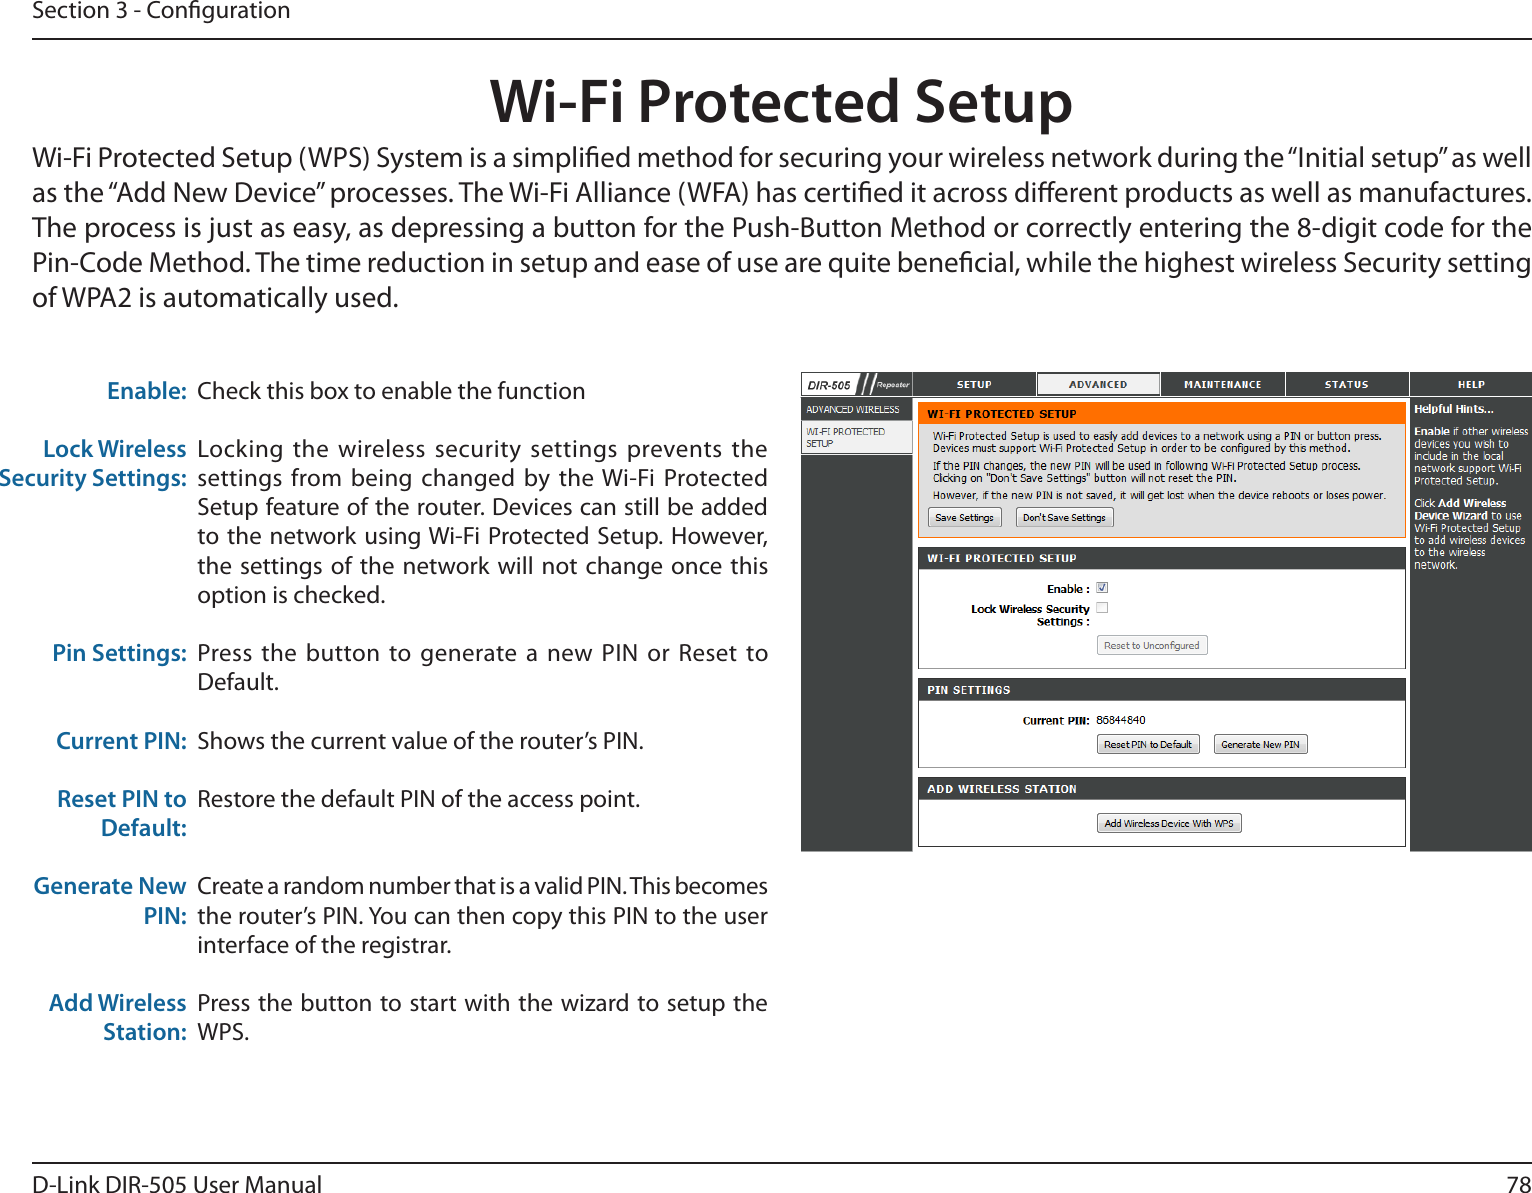 78D-Link DIR-505 User ManualSection 3 - CongurationWi-Fi Protected SetupCheck this box to enable the functionLocking the  wireless security settings  prevents the settings  from being  changed  by  the Wi-Fi Protected Setup feature of the router. Devices can still be added to the network using Wi-Fi  Protected Setup. However, the settings  of the  network will not  change once  this option is checked.Press the  button to generate a  new PIN or  Reset to Default. Shows the current value of the router’s PIN.Restore the default PIN of the access point.Create a random number that is a valid PIN. This becomes the router’s PIN. You can then copy this PIN to the user interface of the registrar.Press the button to start with the wizard to setup the WPS. Enable:Lock Wireless Security Settings:Pin Settings:Current PIN:Reset PIN to Default:Generate New PIN:Add Wireless Station:Wi-Fi Protected Setup (WPS) System is a simplied method for securing your wireless network during the “Initial setup” as well as the “Add New Device” processes. The Wi-Fi Alliance (WFA) has certied it across dierent products as well as manufactures. The process is just as easy, as depressing a button for the Push-Button Method or correctly entering the 8-digit code for the Pin-Code Method. The time reduction in setup and ease of use are quite benecial, while the highest wireless Security setting of WPA2 is automatically used.